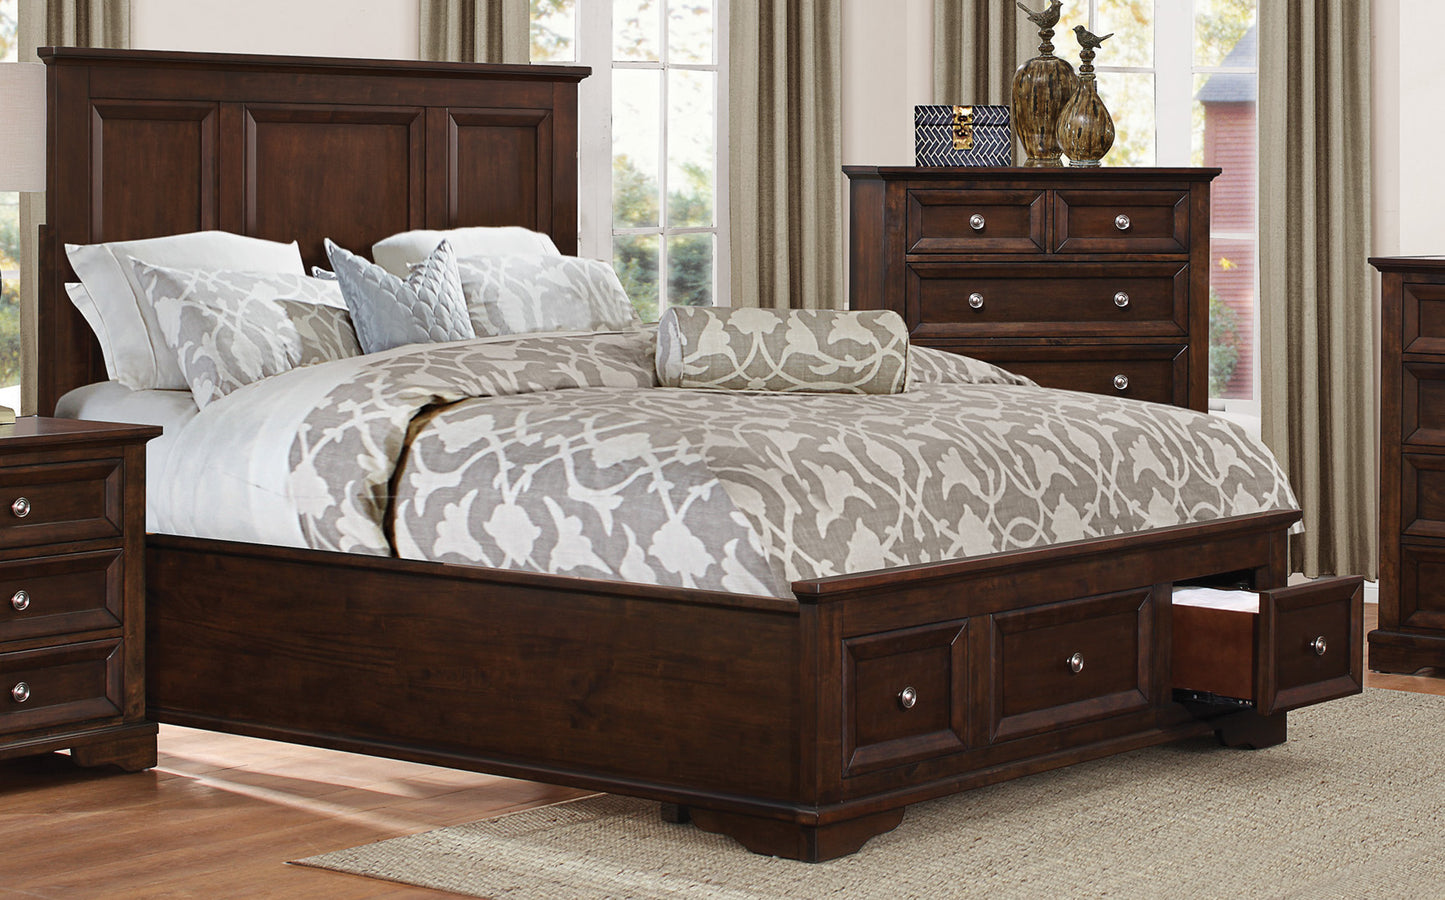 Elista Rustic Country Cal King Platform Bed with Footboard Storage in Espresso